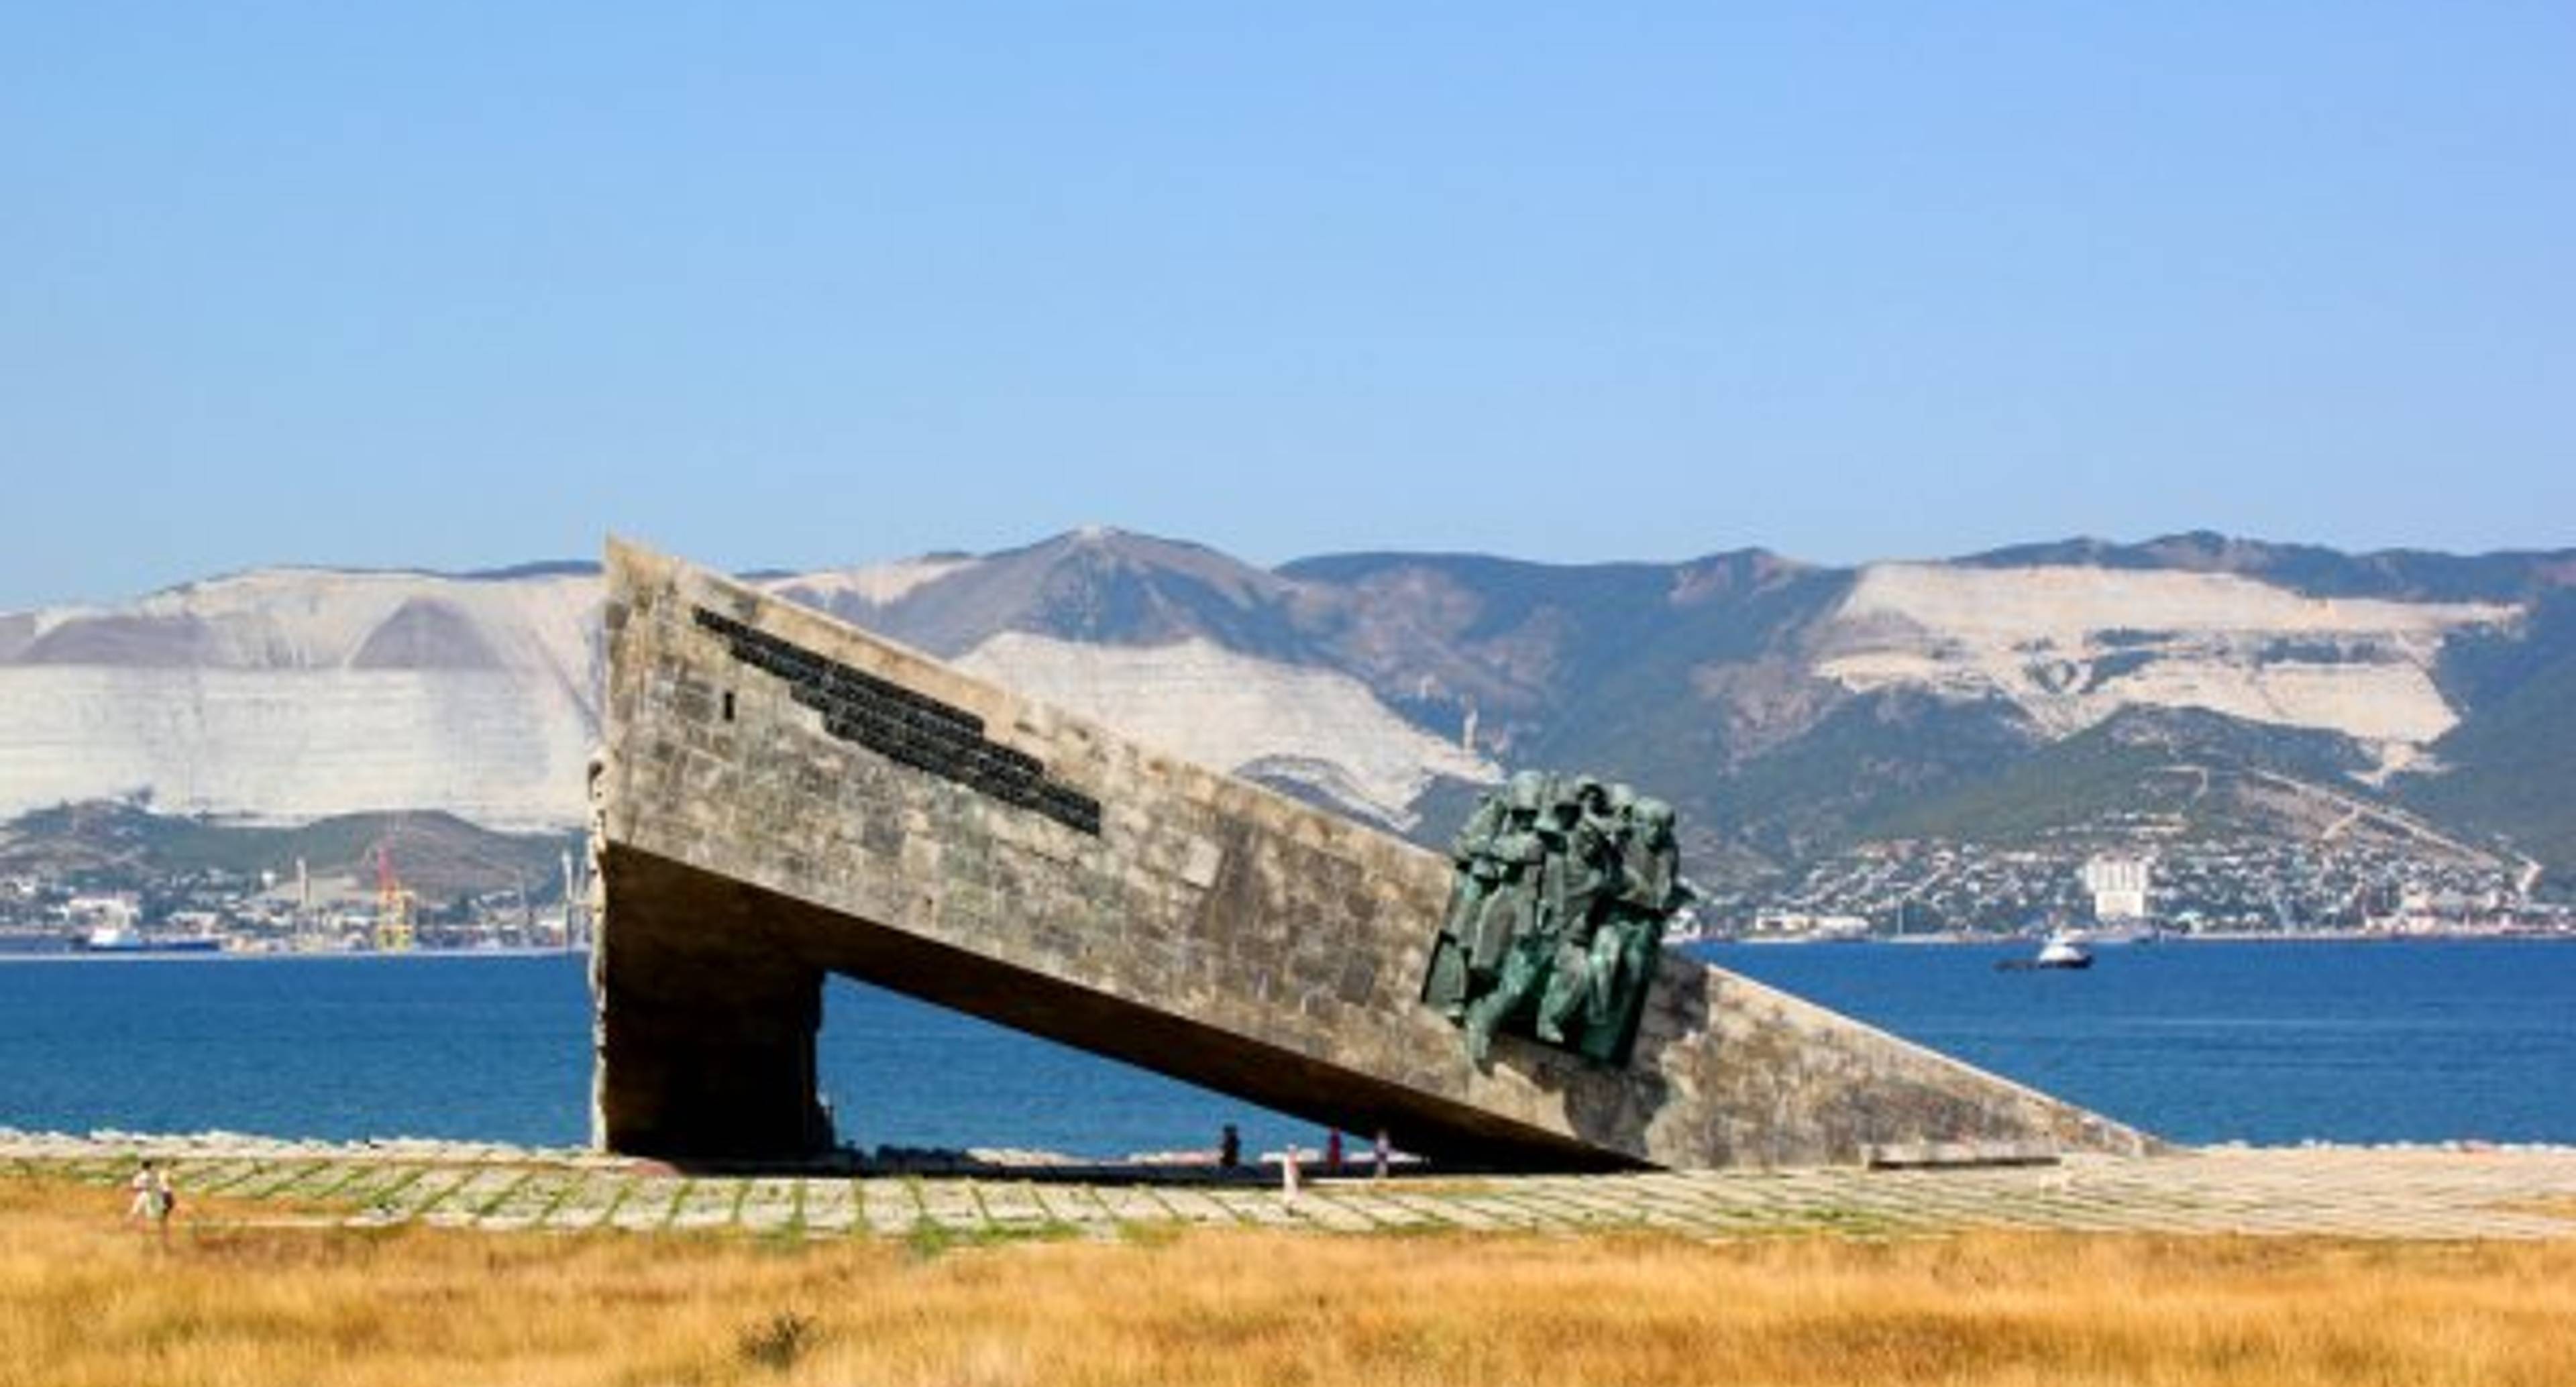 In places of military glory in Novorossiysk.